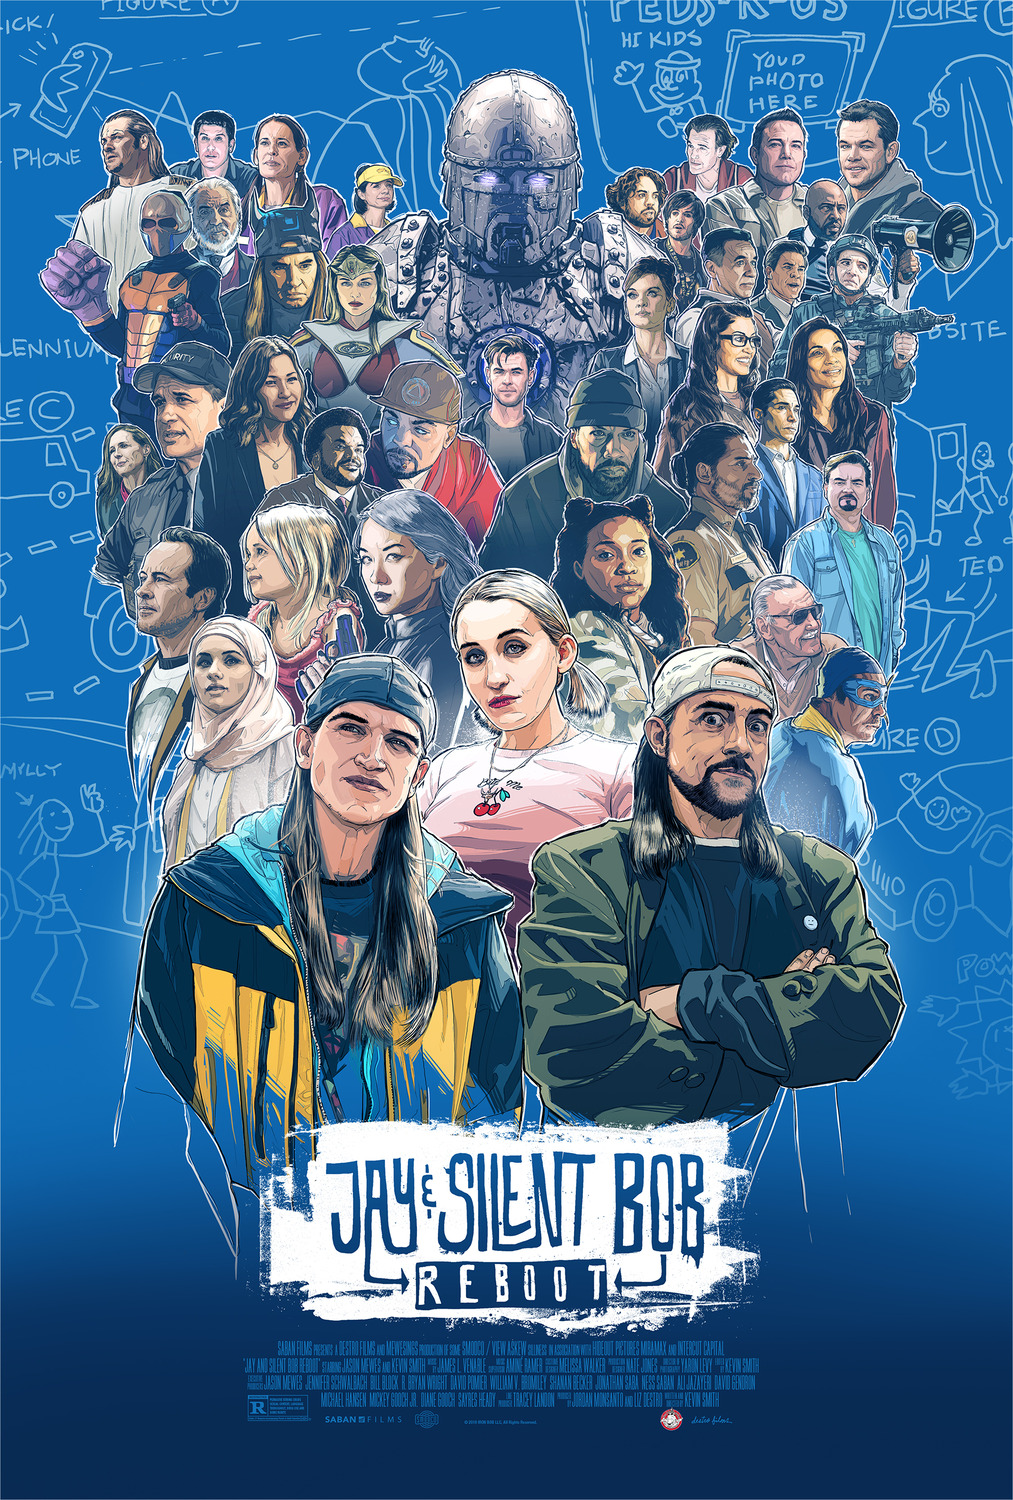 Extra Large Movie Poster Image for Jay and Silent Bob Reboot (#4 of 4)